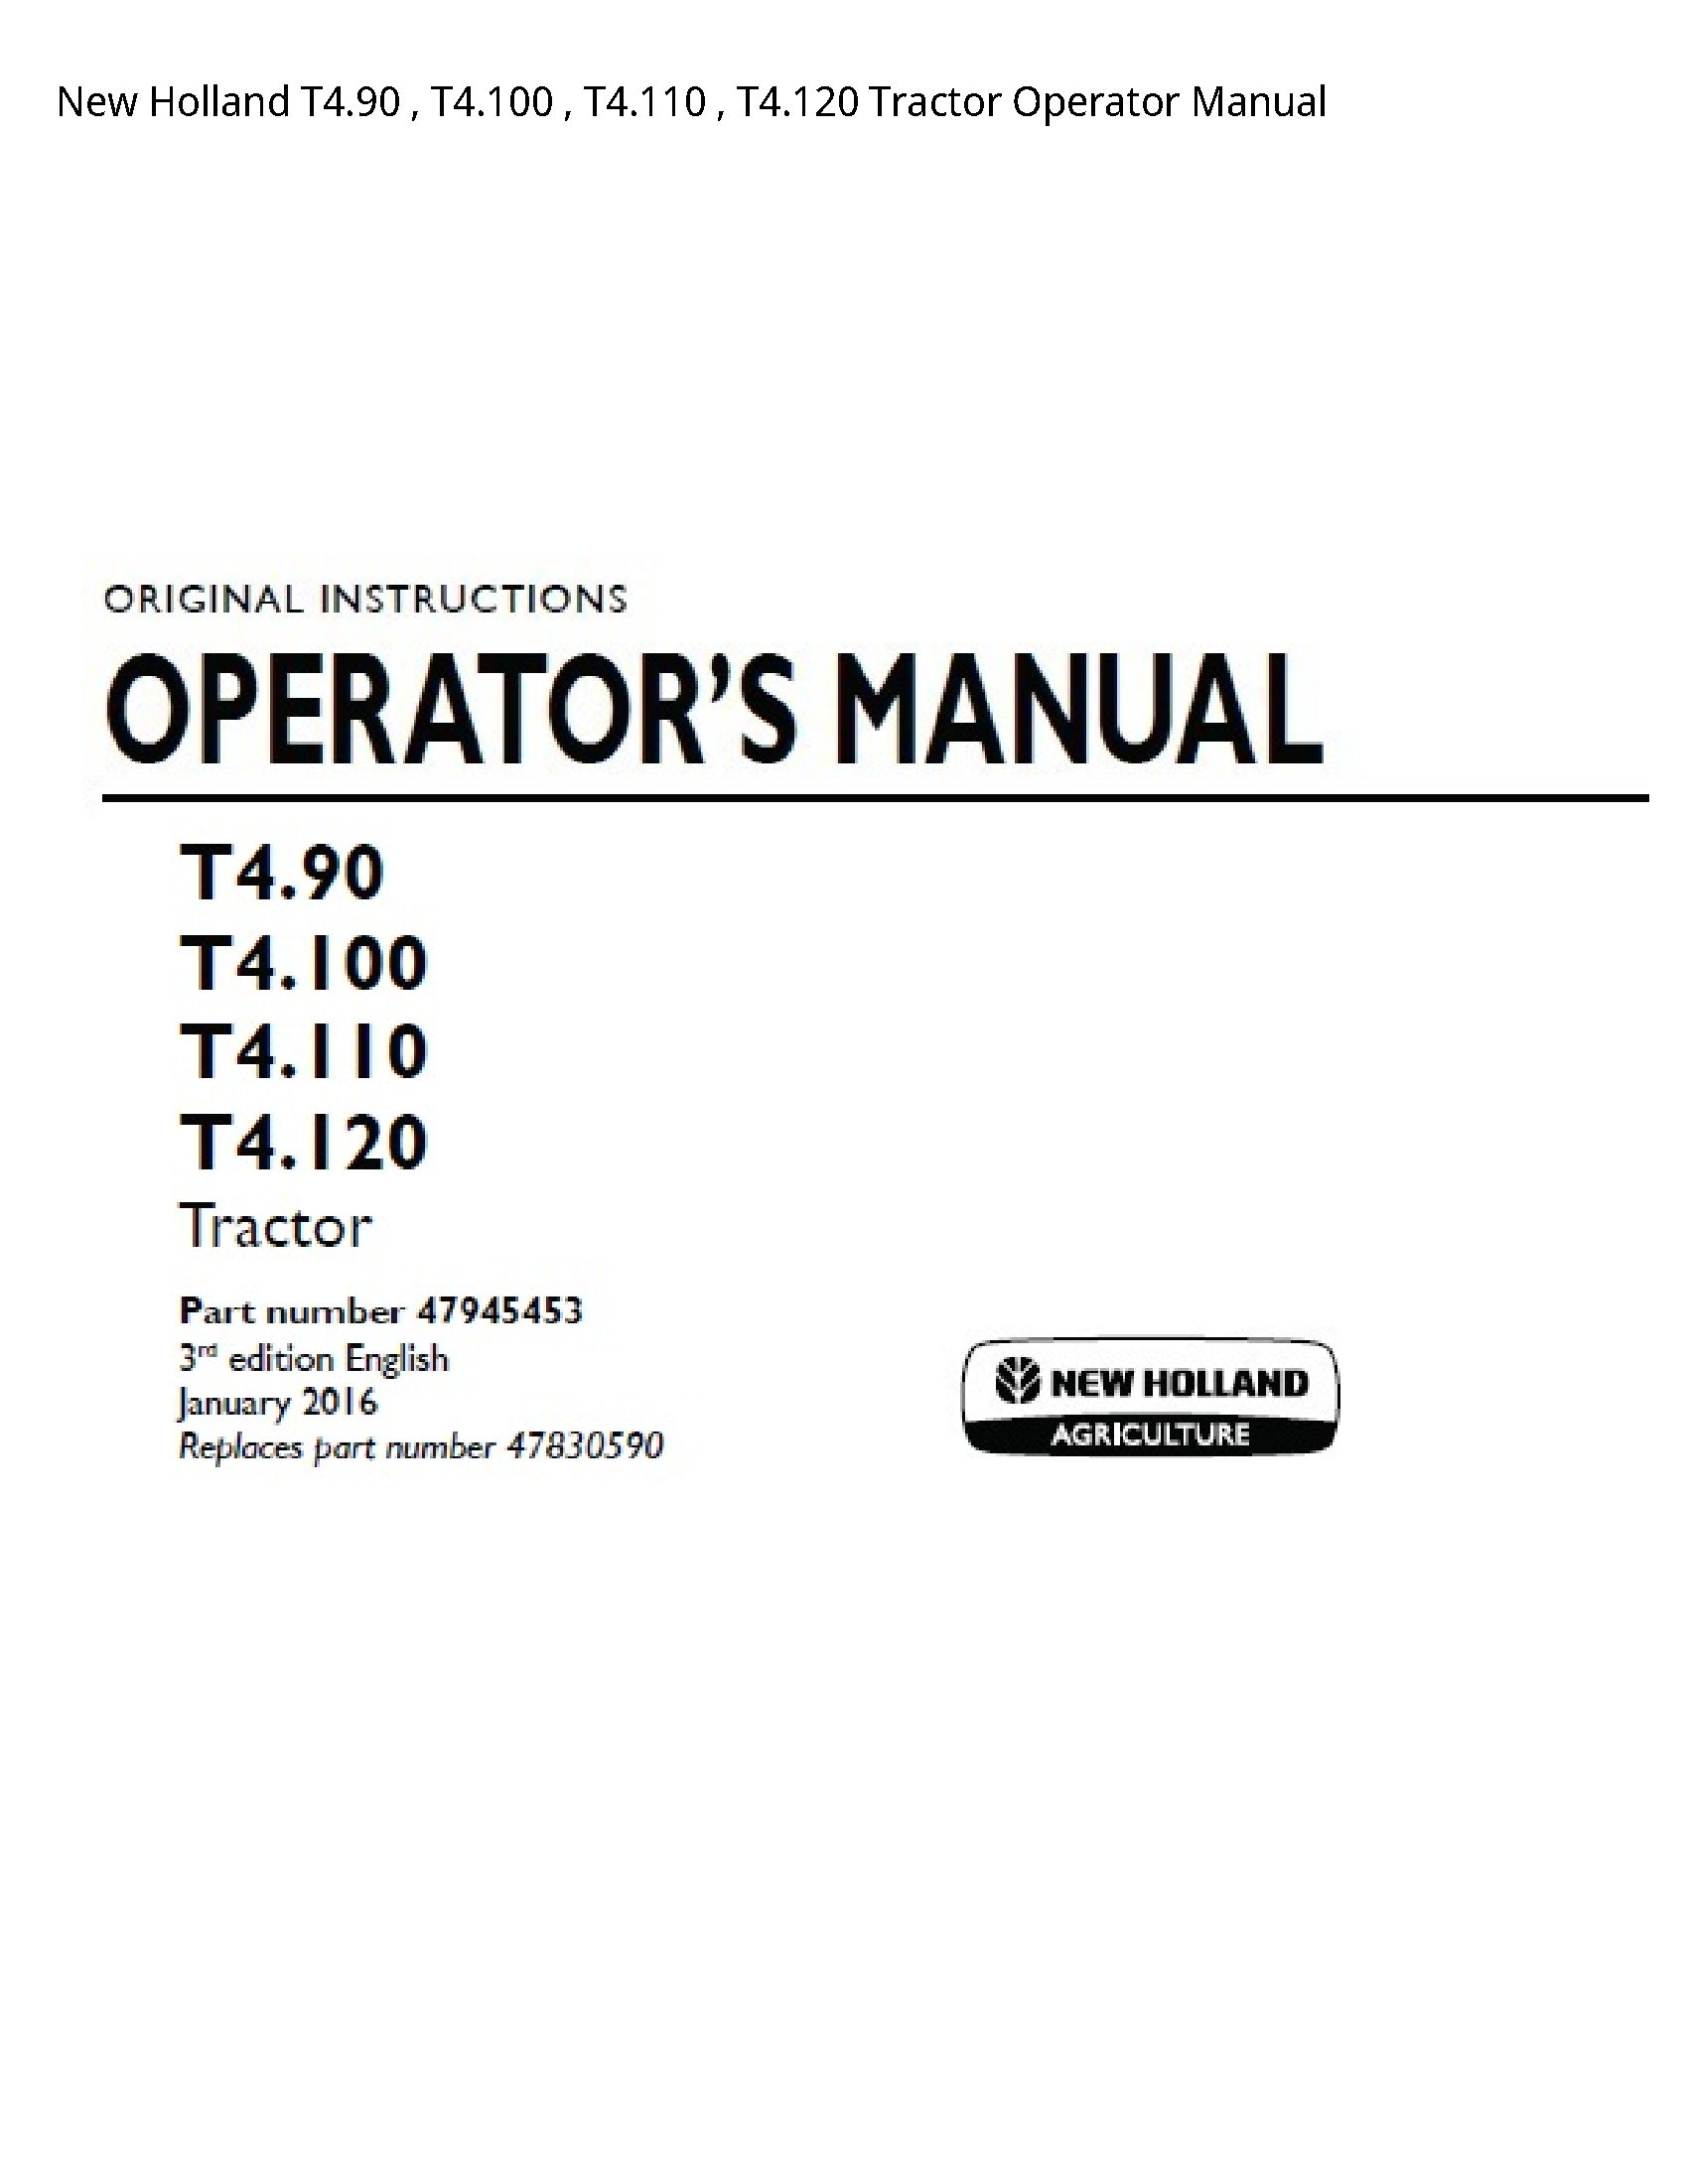 New Holland T4.90 Tractor Operator manual